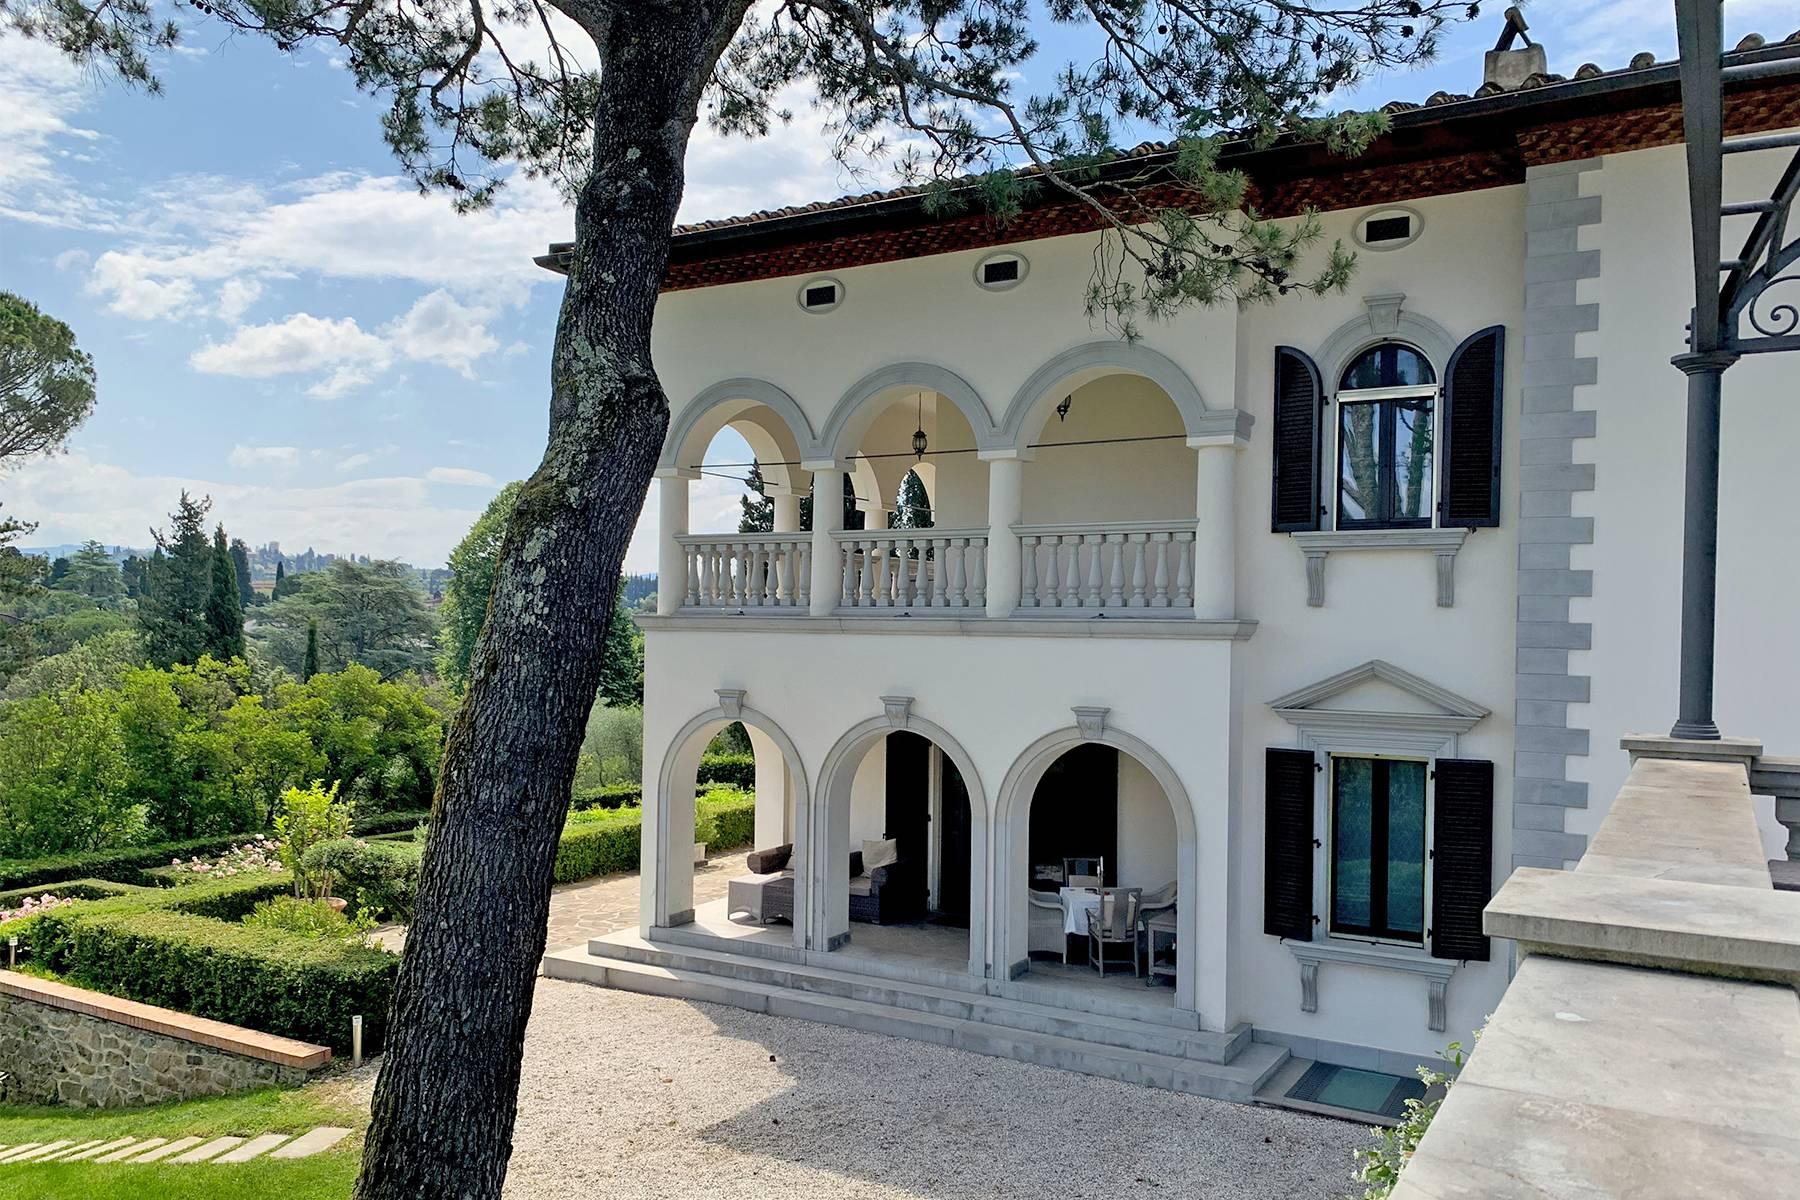 Splendid villa with pool on the Poggio Imperiale hill in Florence - 1